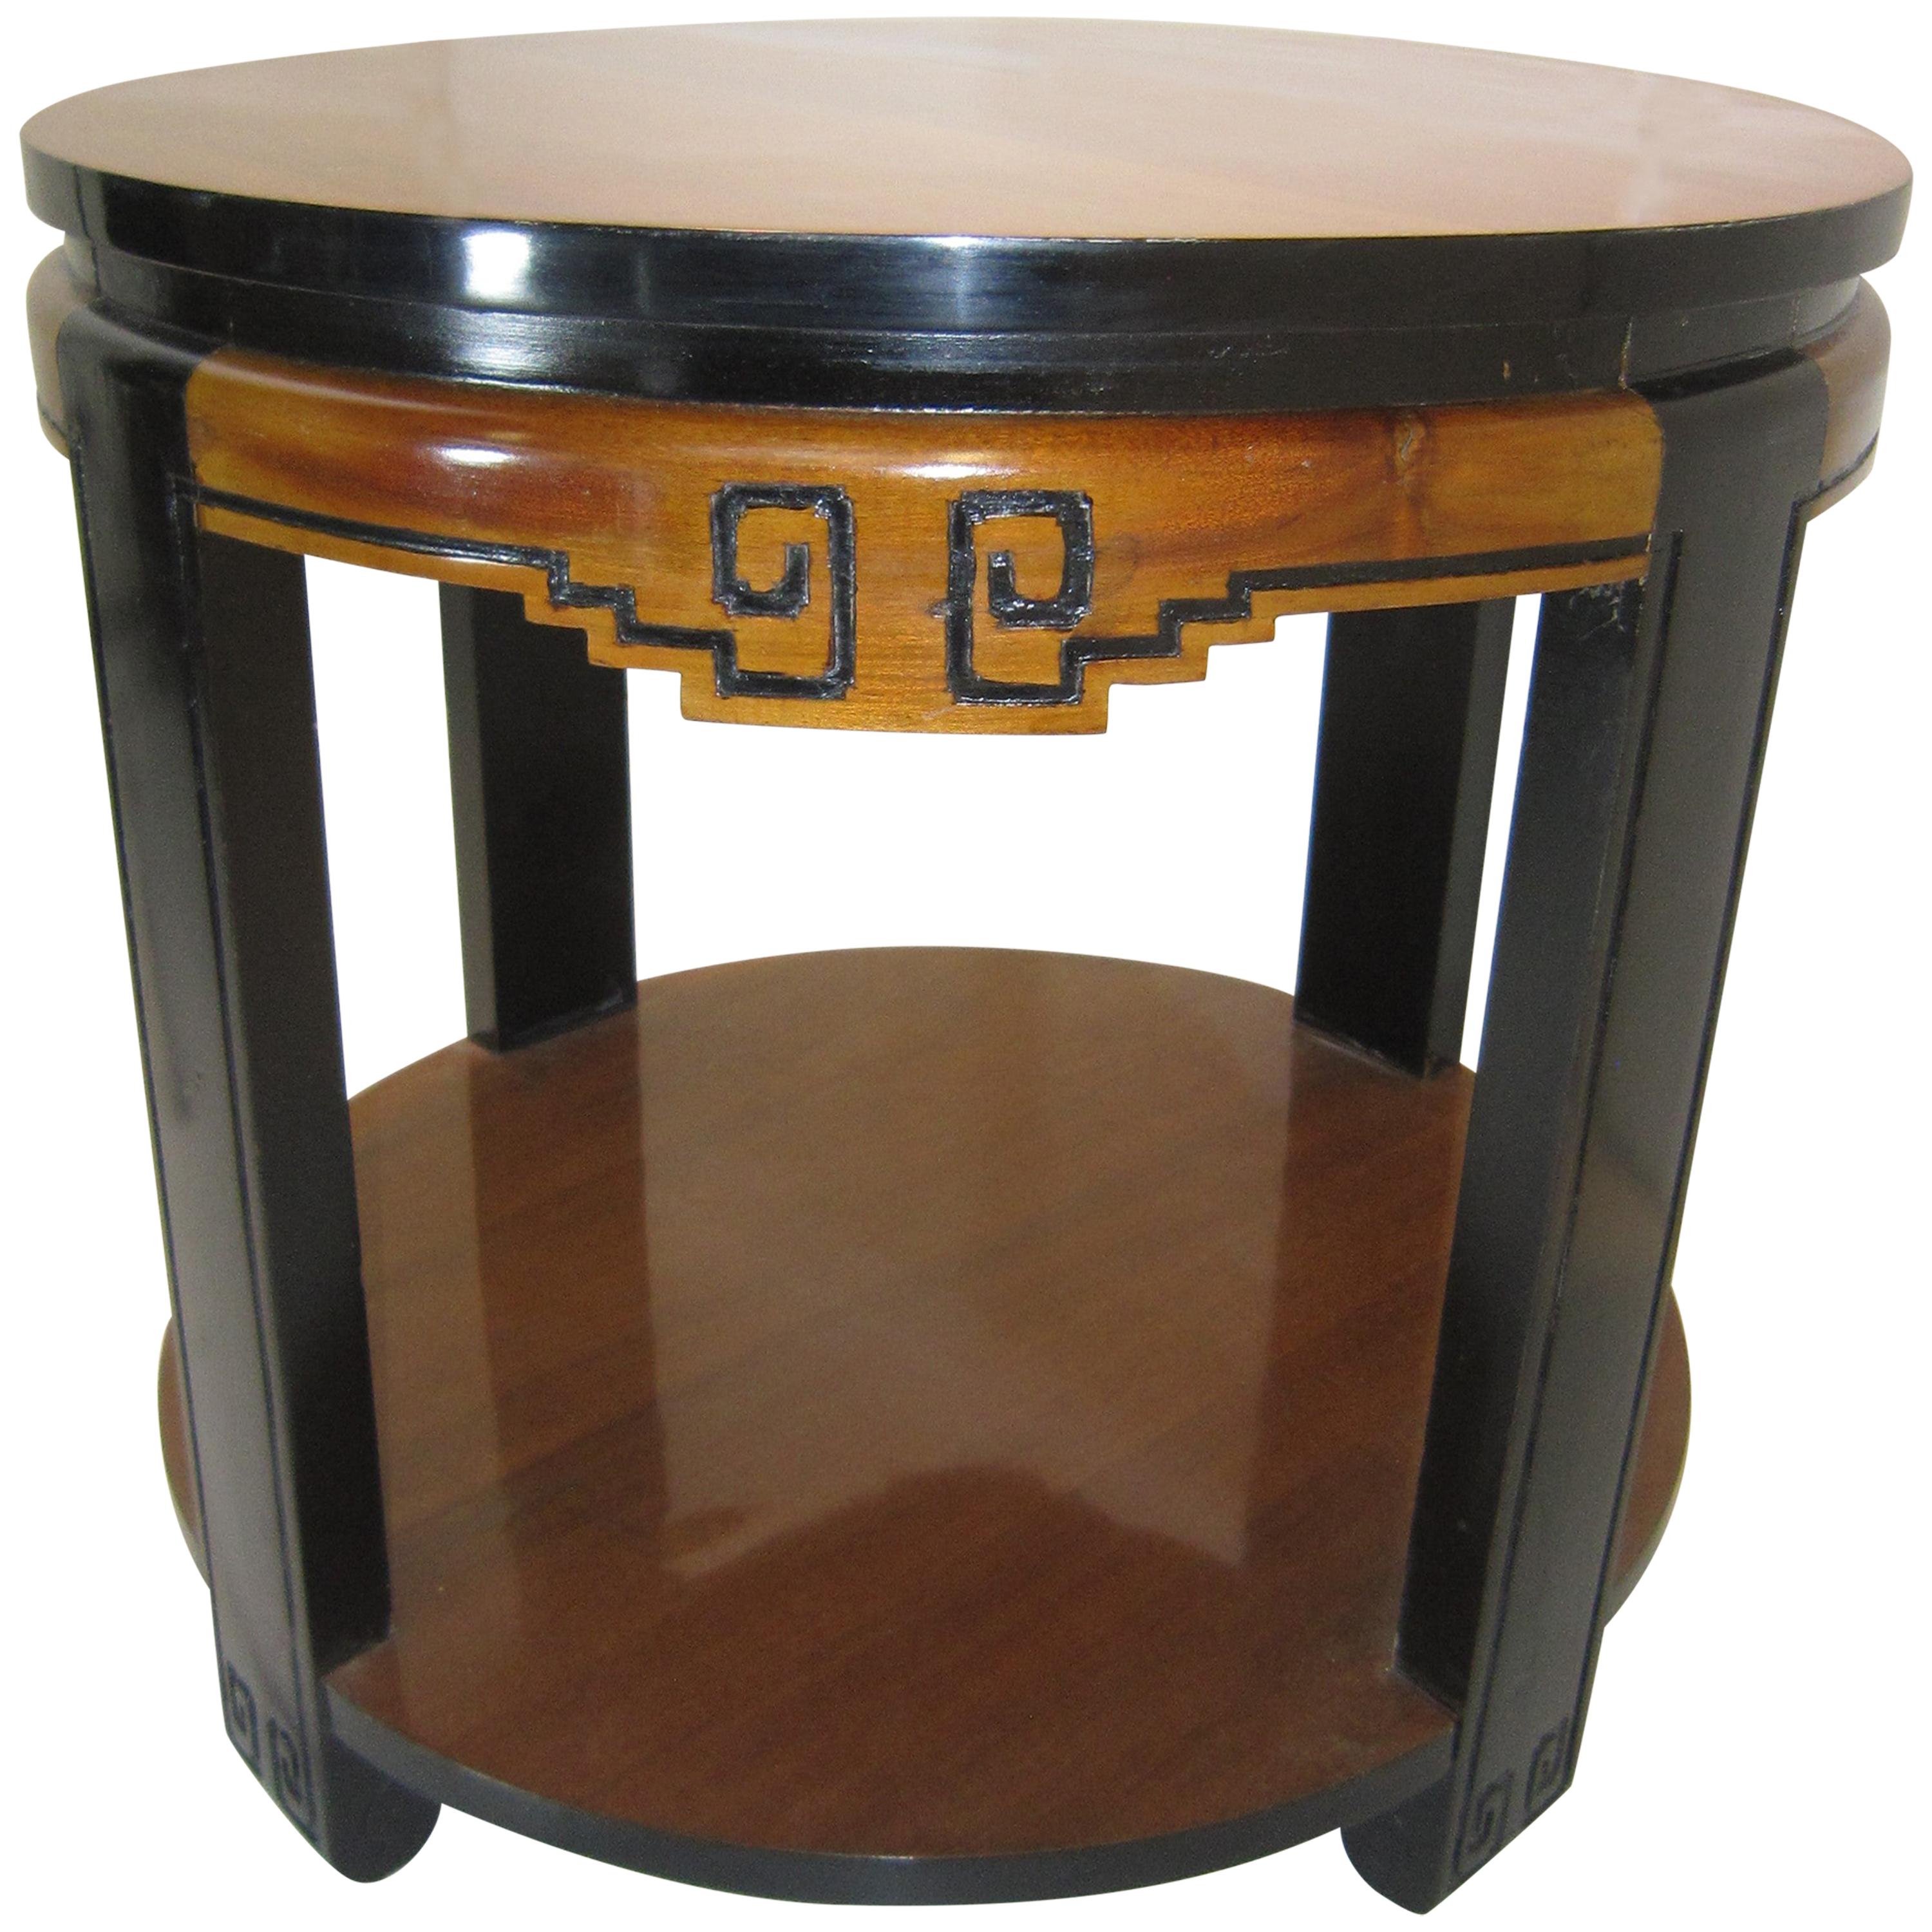 Original Art Deco Two-Tone Circular Table with Chinoiserie Design